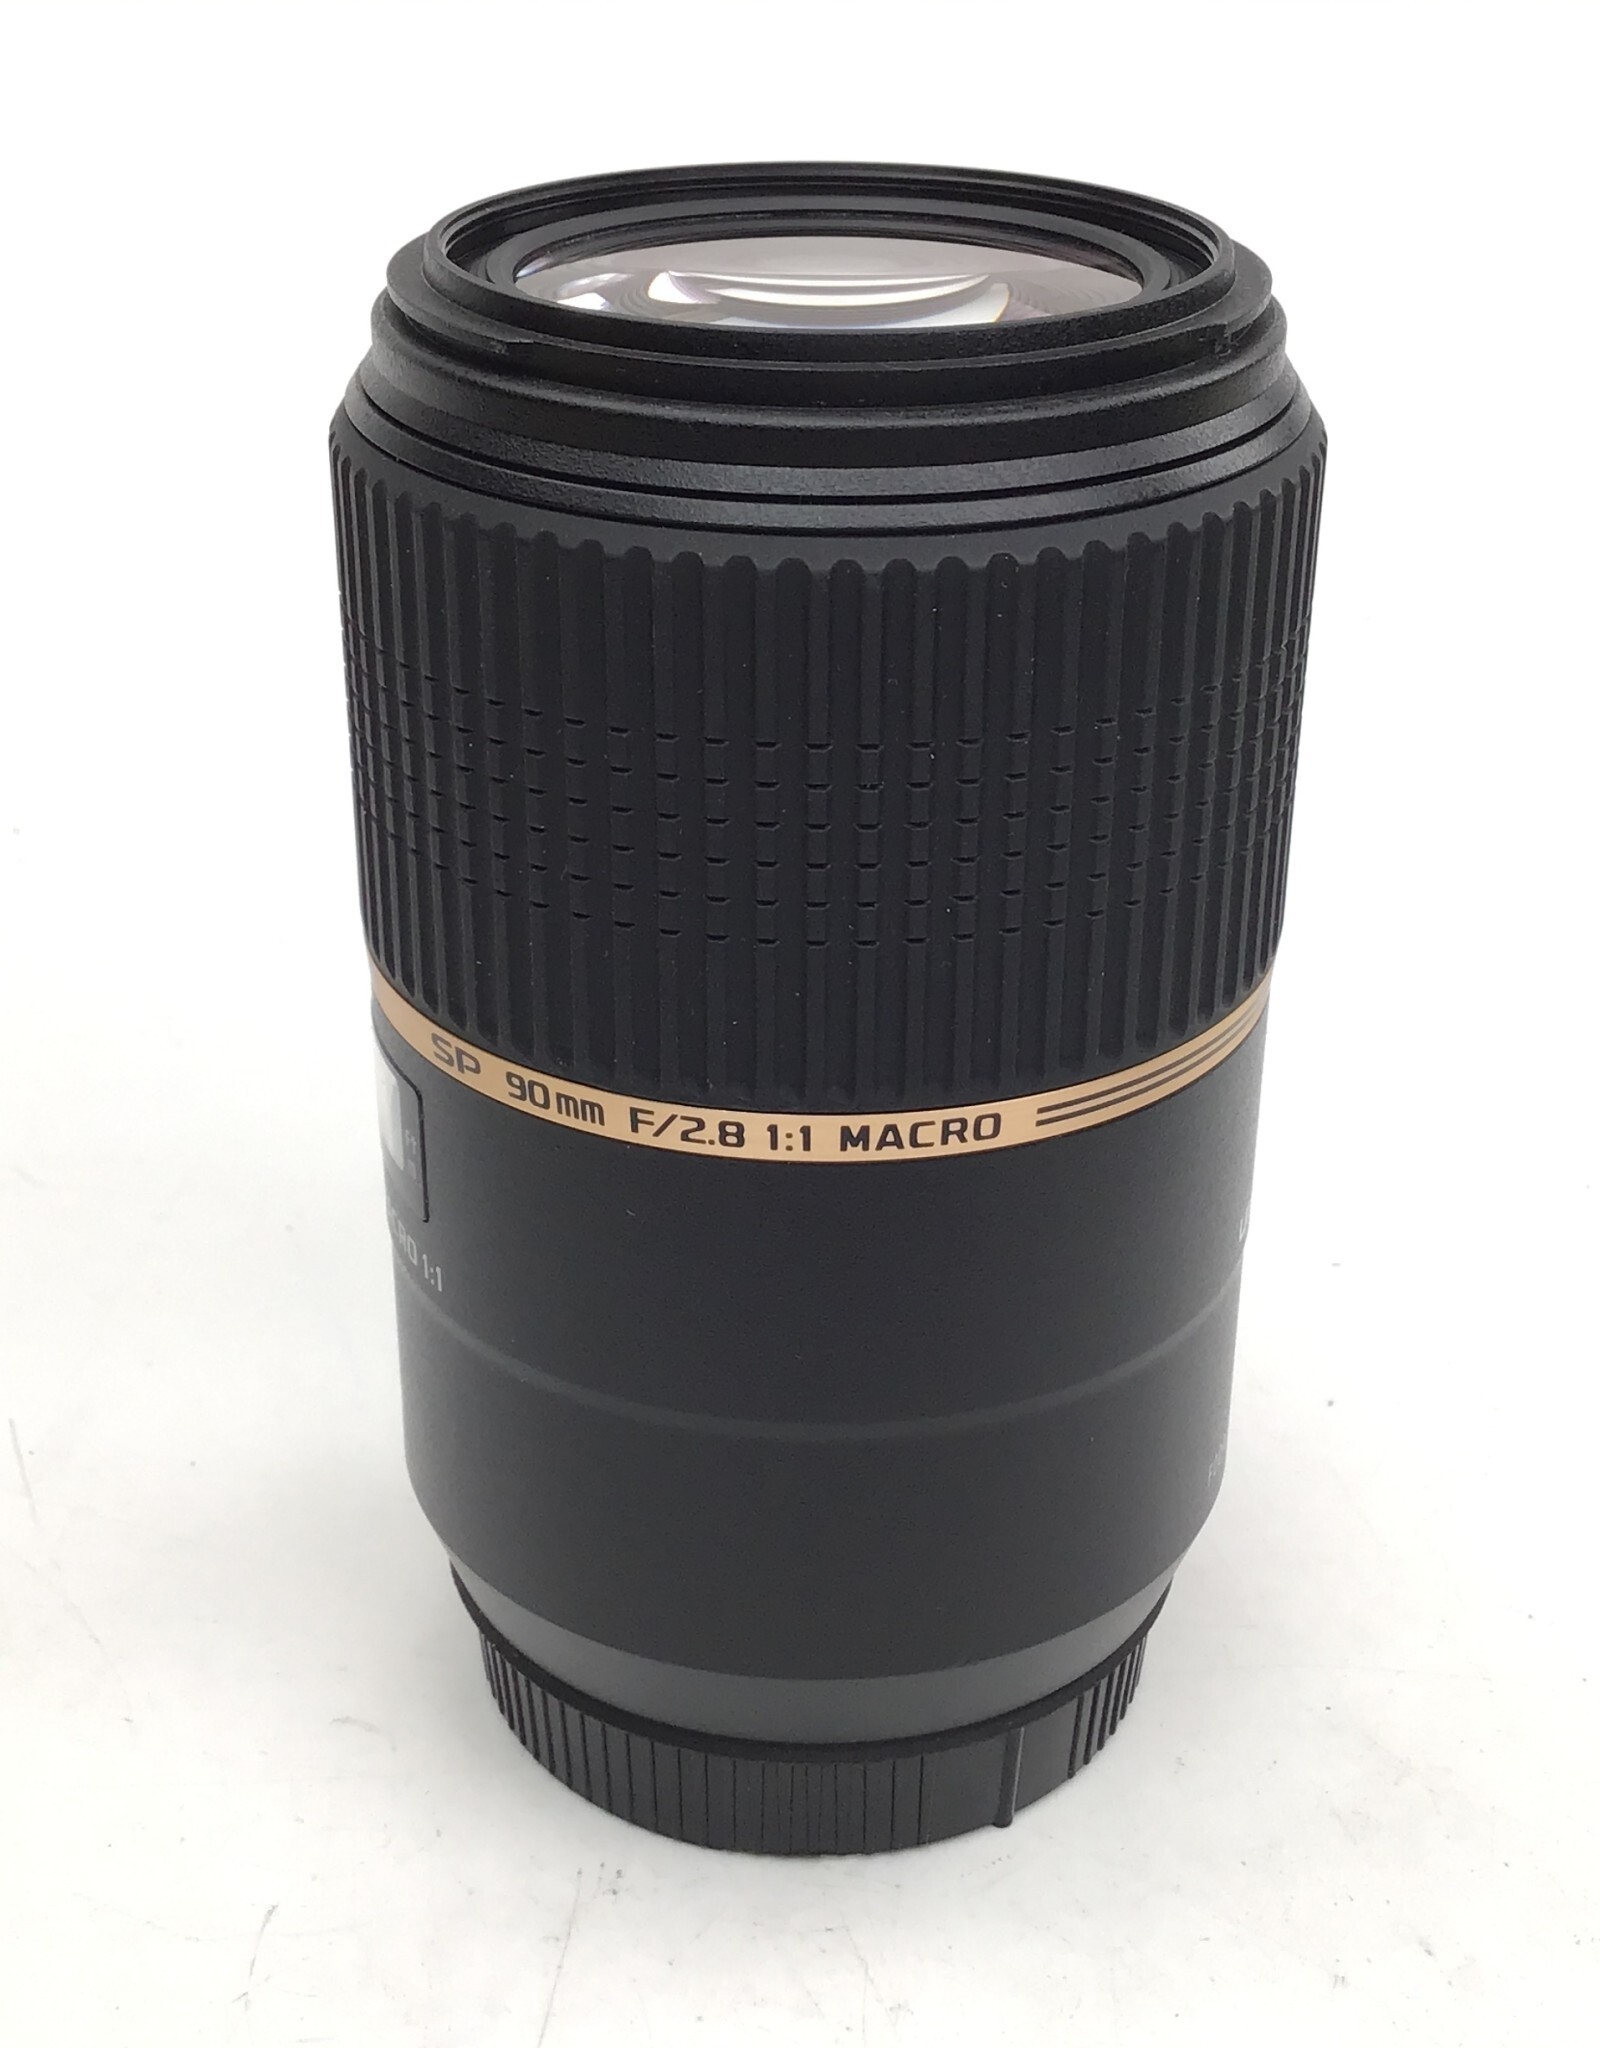 TAMRON Tamron SP 90mm f2.8 Di Macro VC USD Lens for Canon EF Used Good